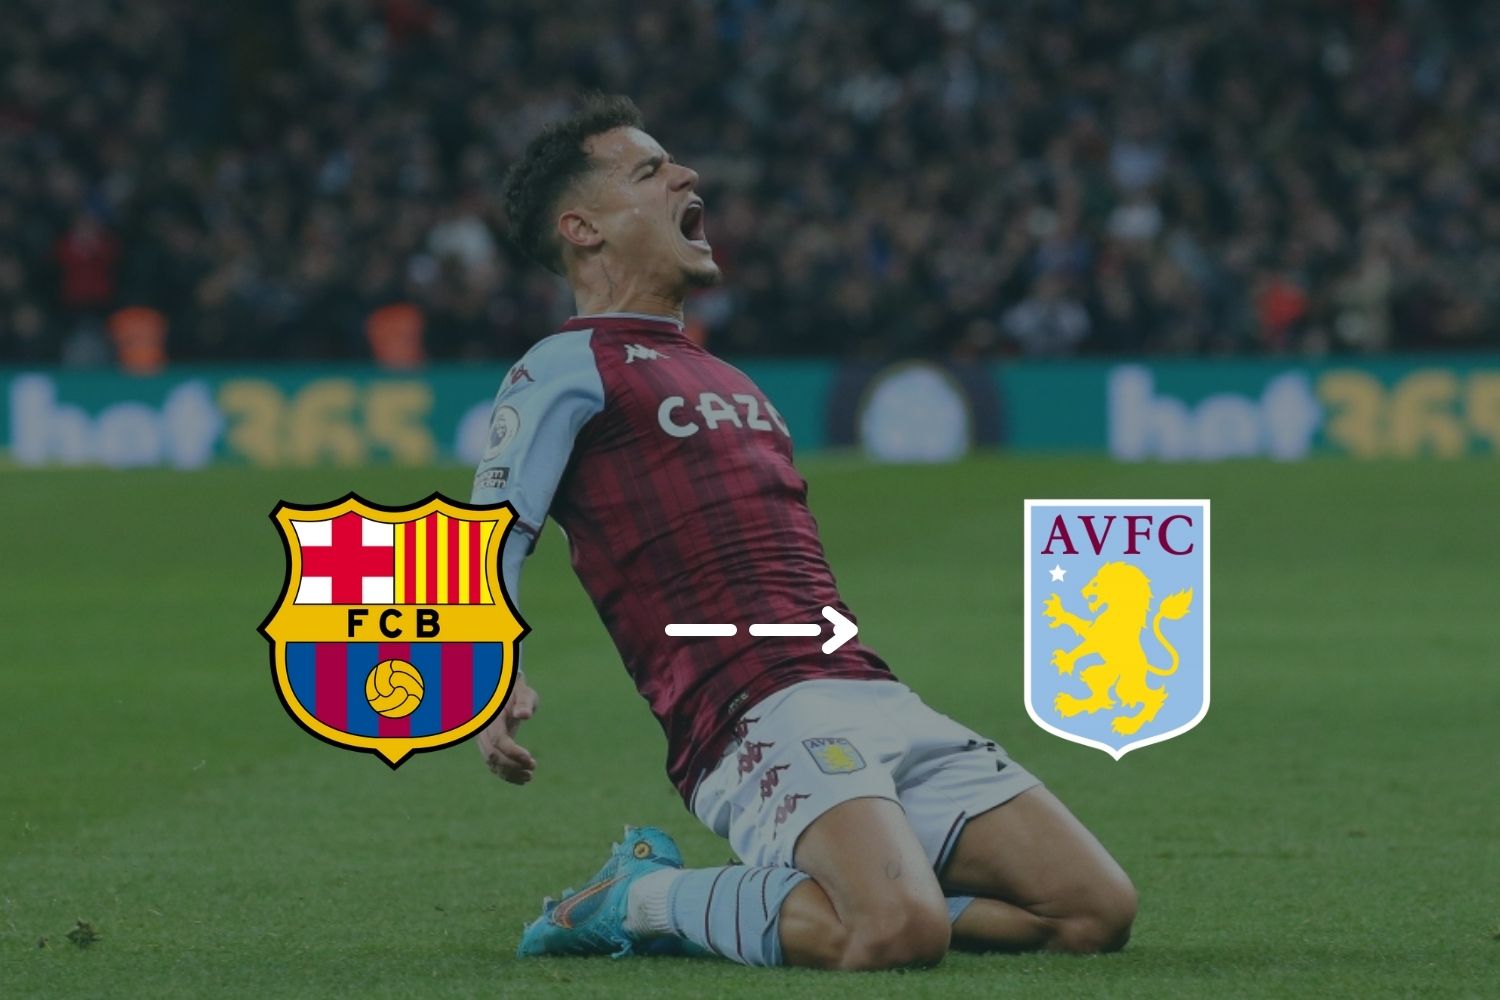 Coutinho signs permanently for Aston Villa